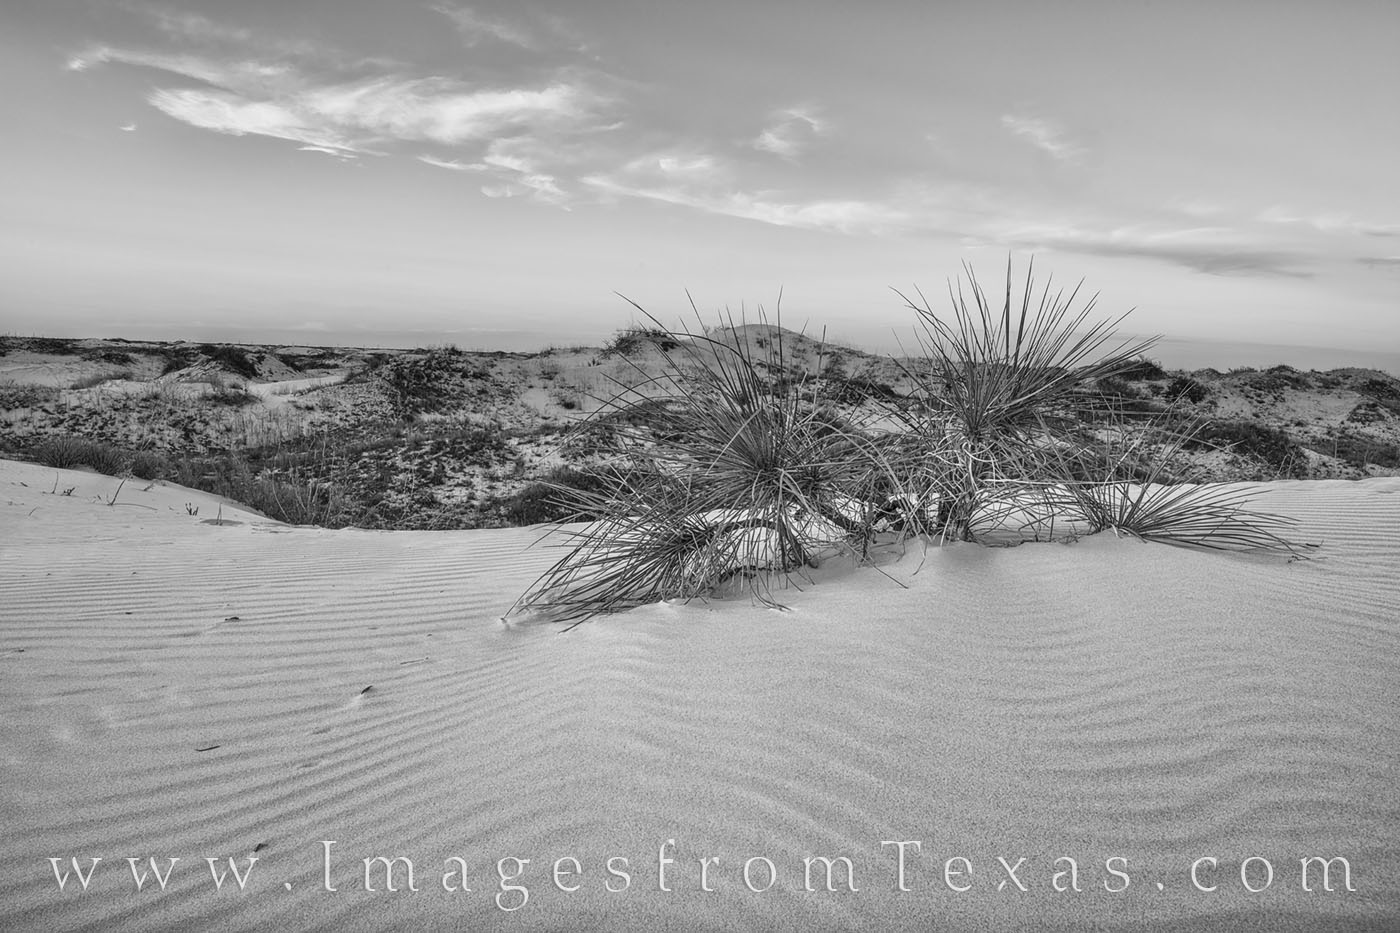 The Sand Dunes of Sandhills State Park near Monahans, Texas, offers some interesting opportunities for photography at anytime...